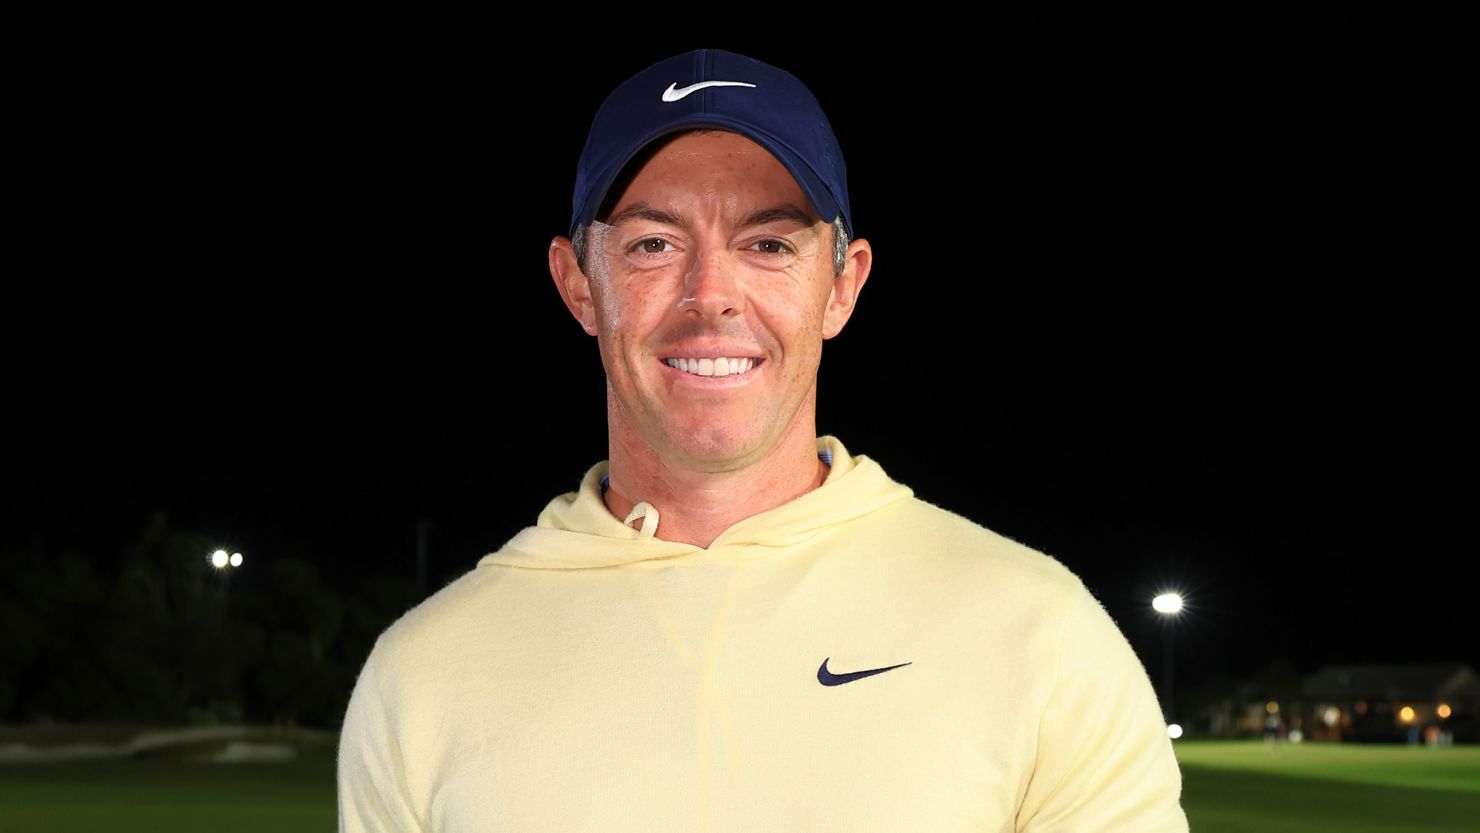 Rory McIlroy after winning The Match in Florida on Monday.